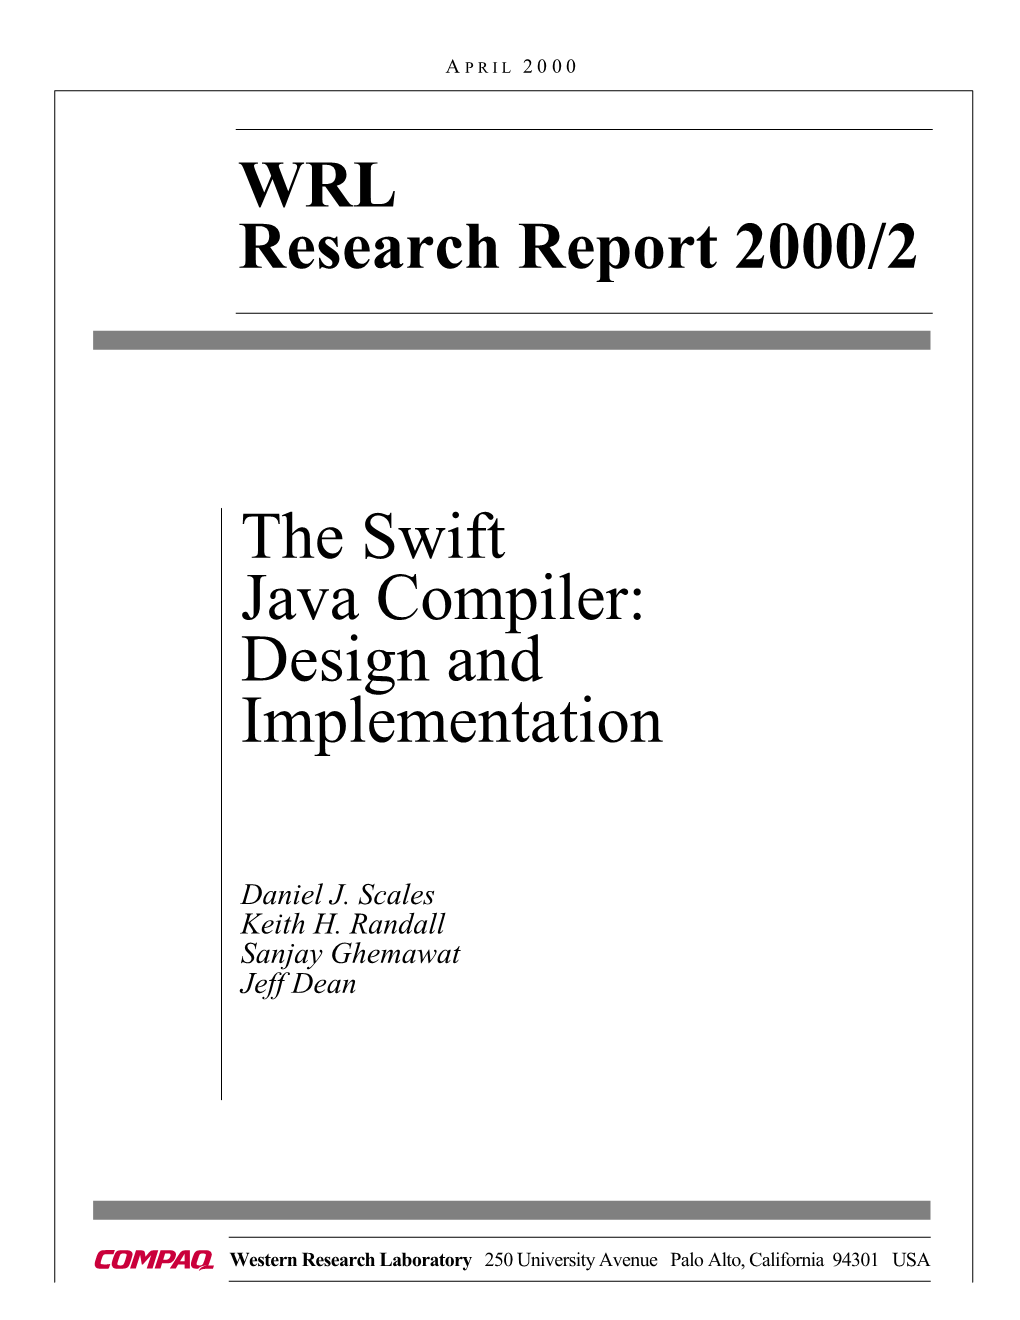 The Swift Java Compiler: Design and Implementation